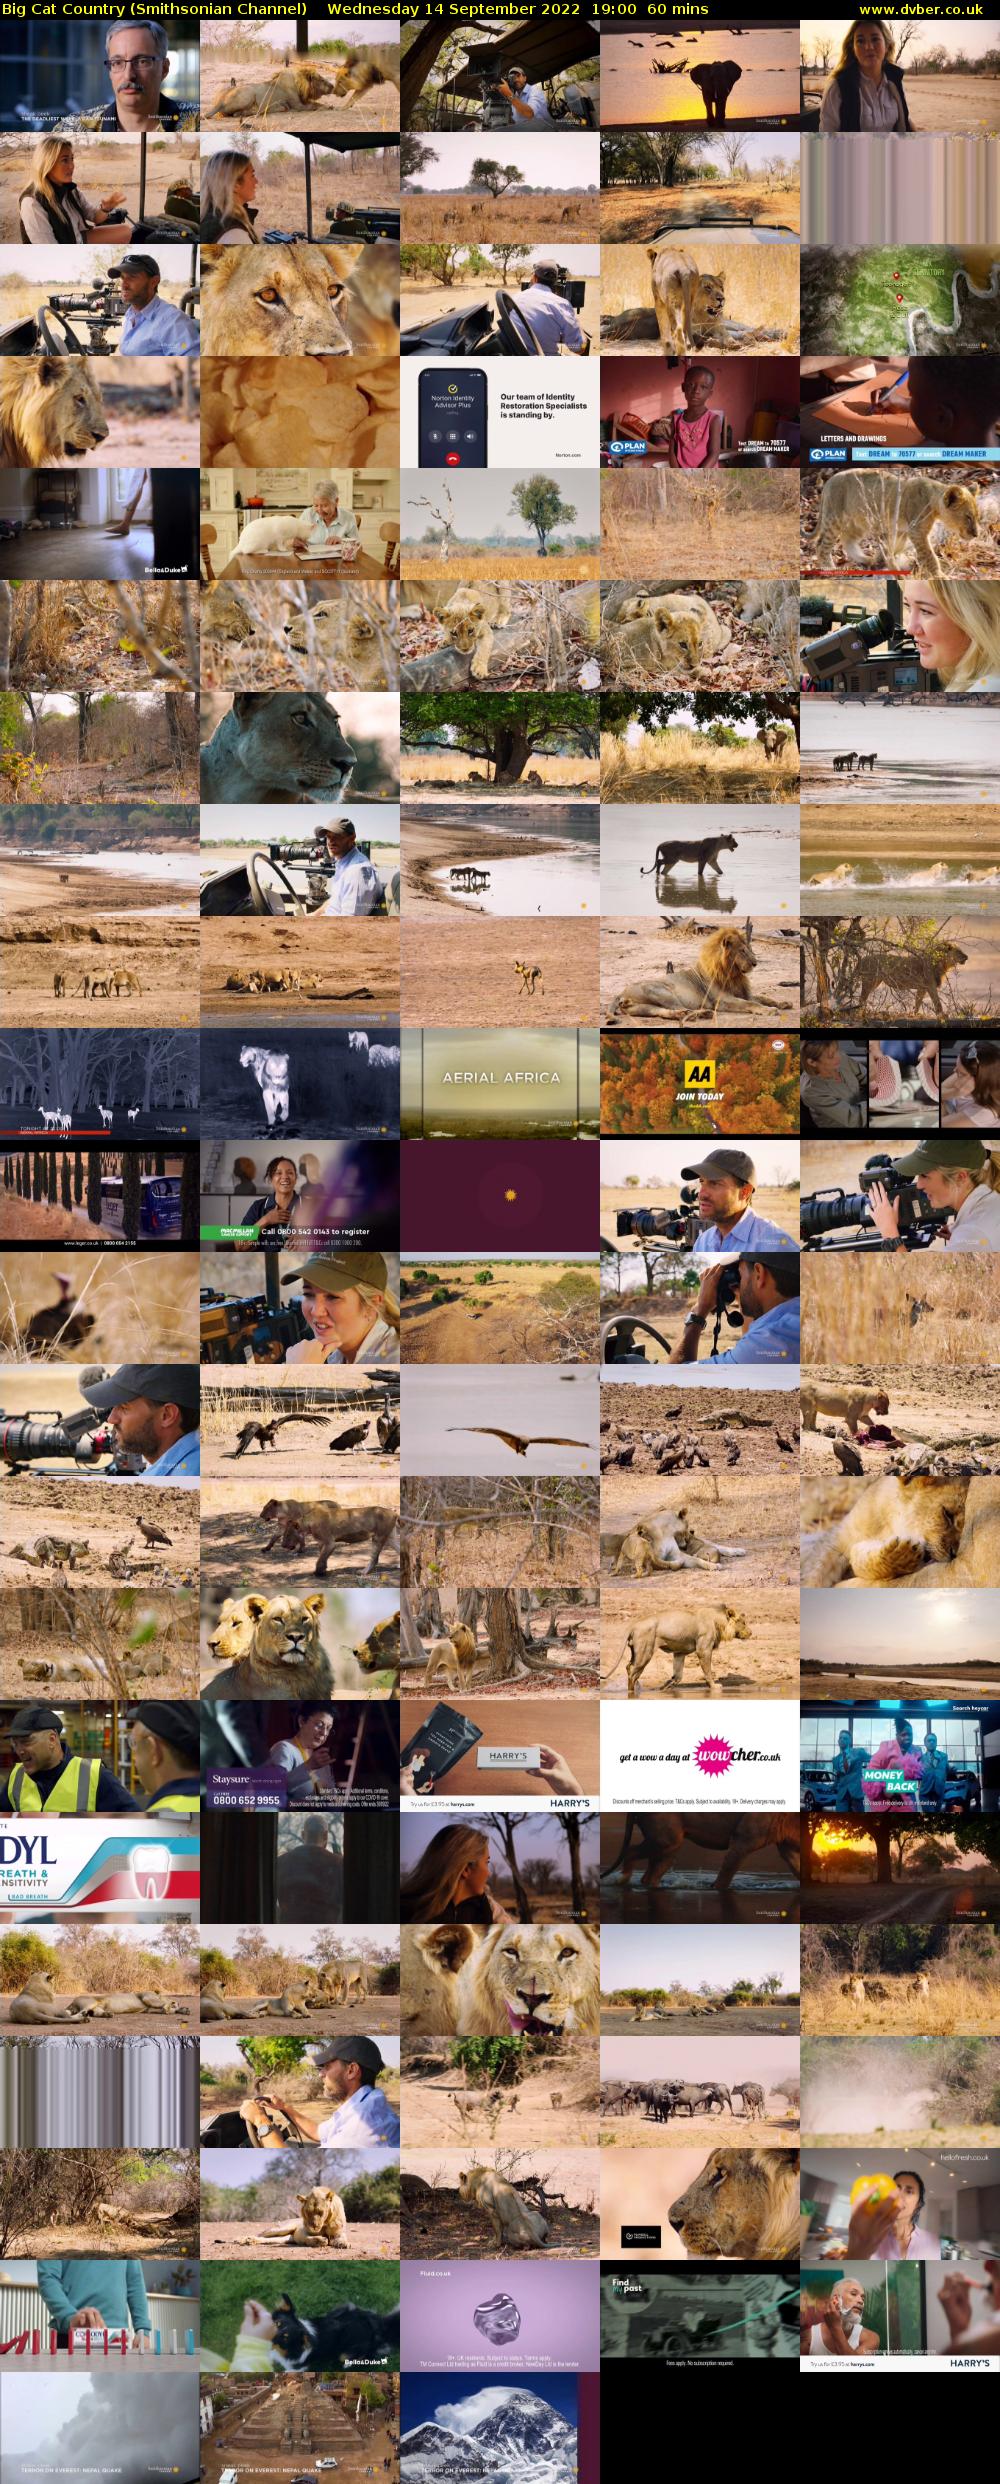 Big Cat Country (Smithsonian Channel) Wednesday 14 September 2022 19:00 - 20:00